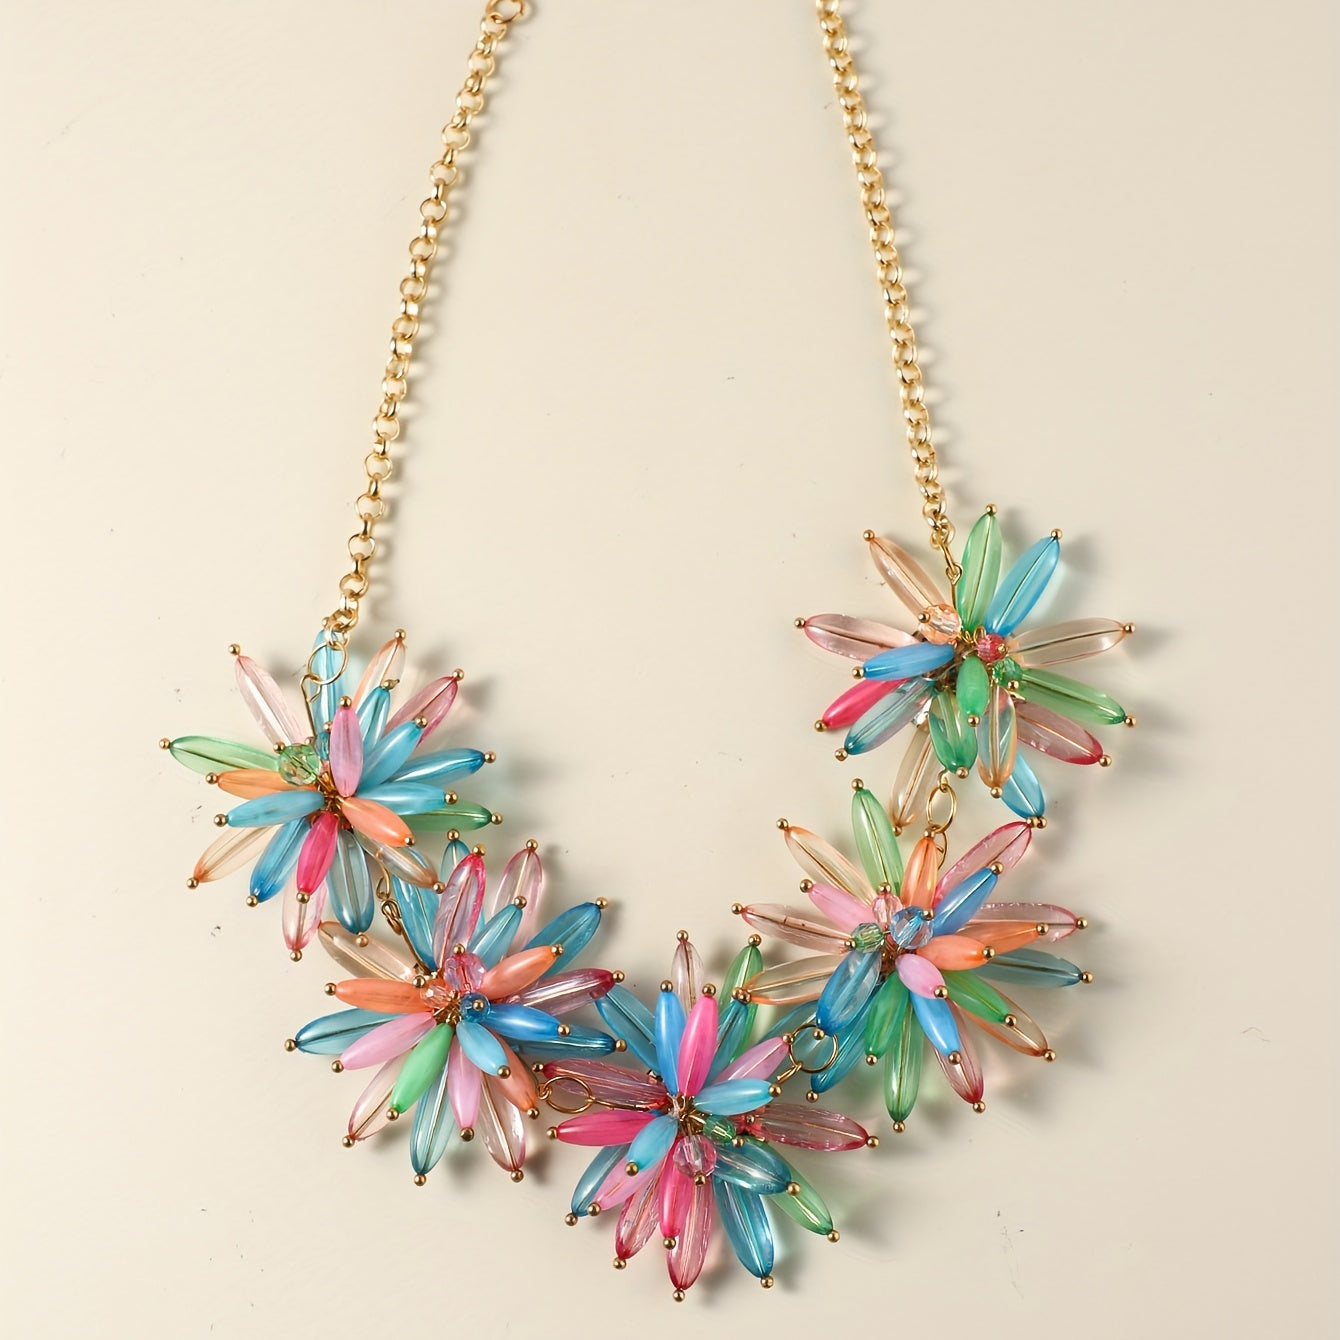 Personality Flower Acrylic Design Necklace Exaggerated Transparent Flower Design Collarbone Chain Statement Necklace